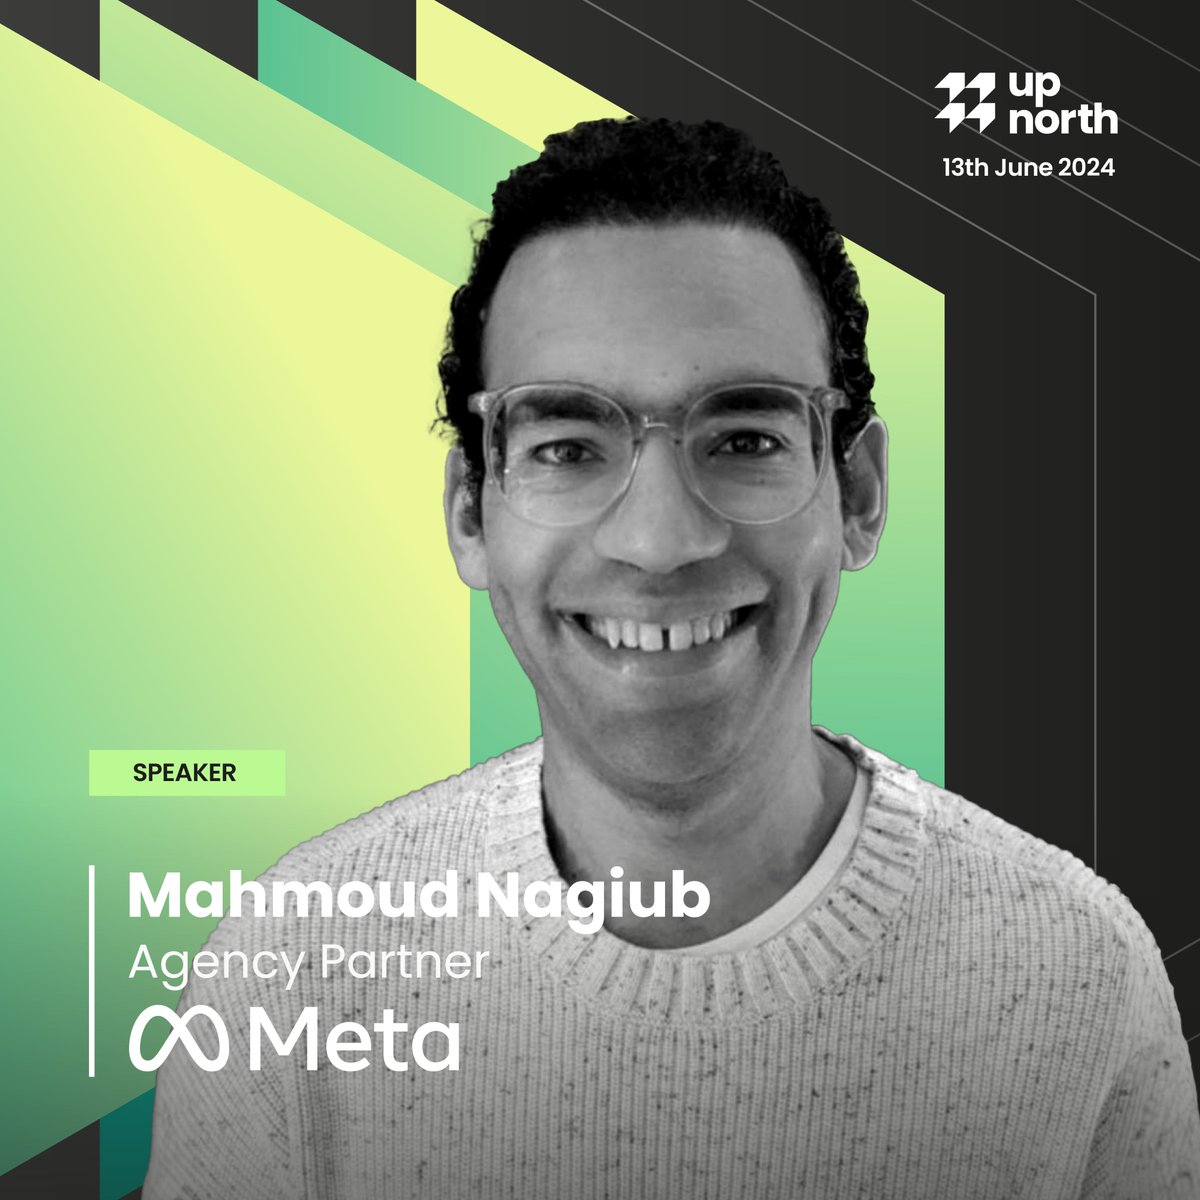 We are excited to announce TWO more speakers joining the Up North lineup: Ella Wright, NEOM Wellbeing and Mahmoud Nagiub, Meta 🔥 🎫 Over 50% of Up North tickets have already gone, register now to secure your place at our one-day marketing festival: hubs.li/Q02pfkl00